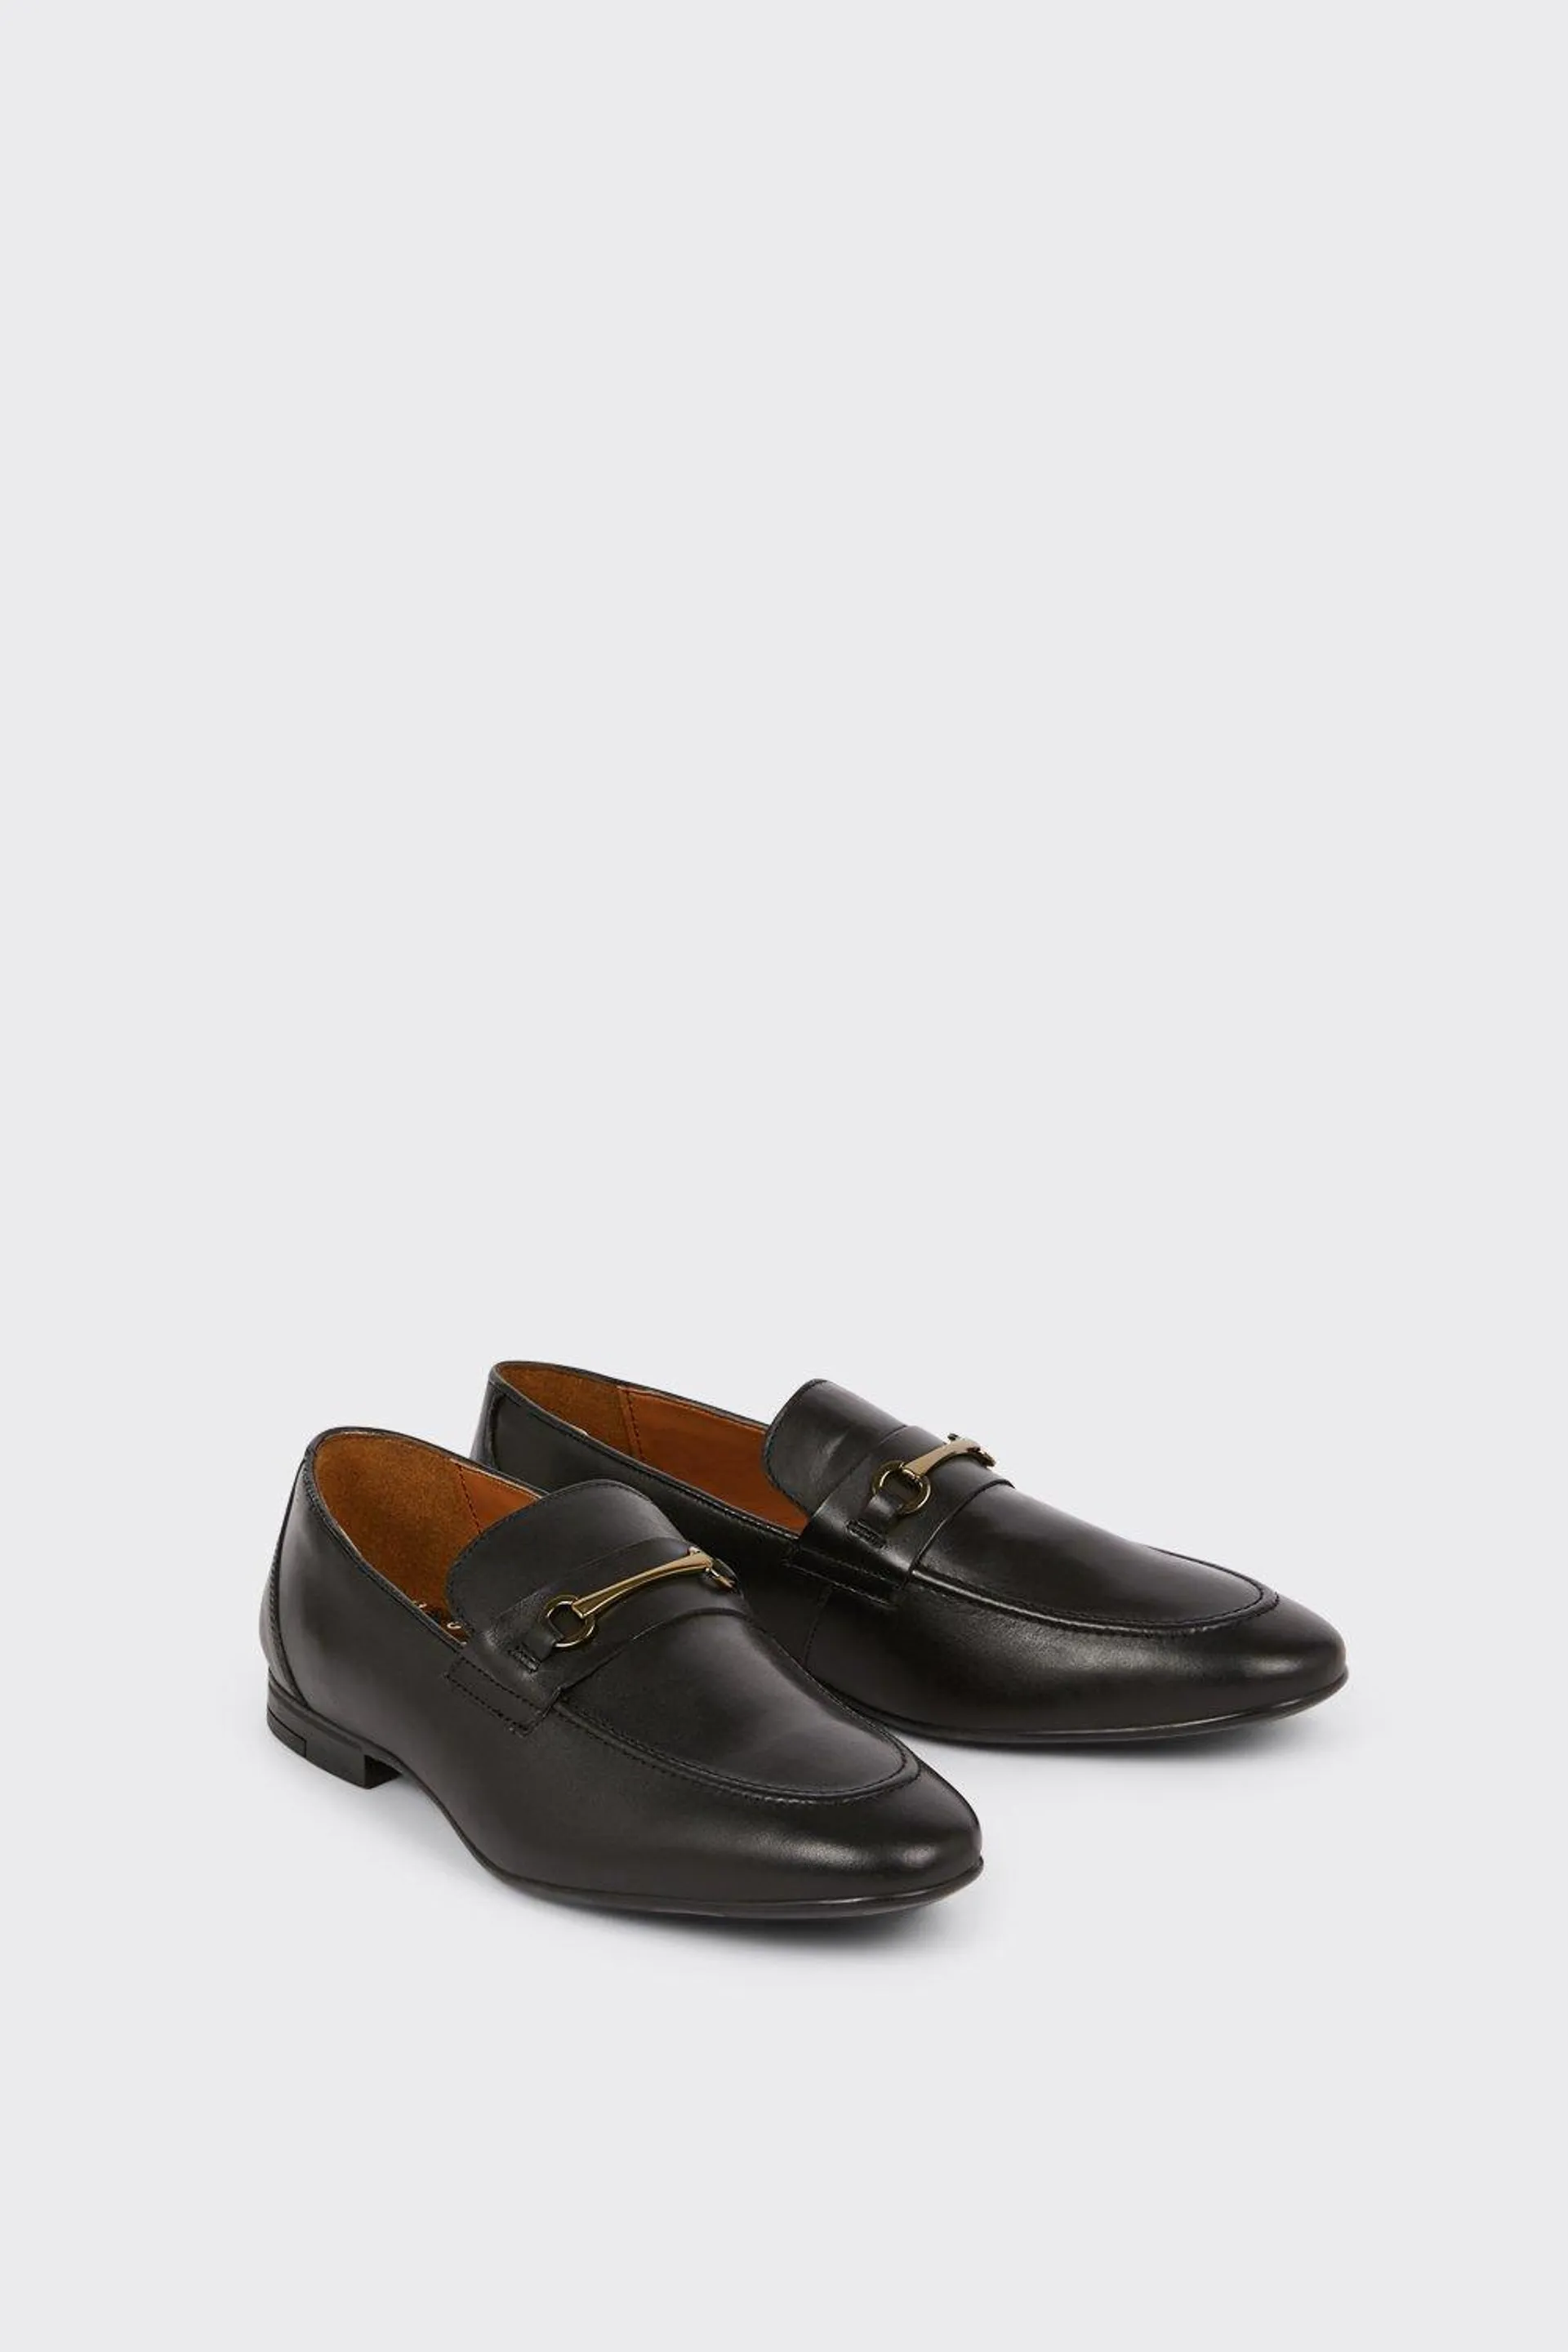 Leather Gold Buckle Slip On Loafers